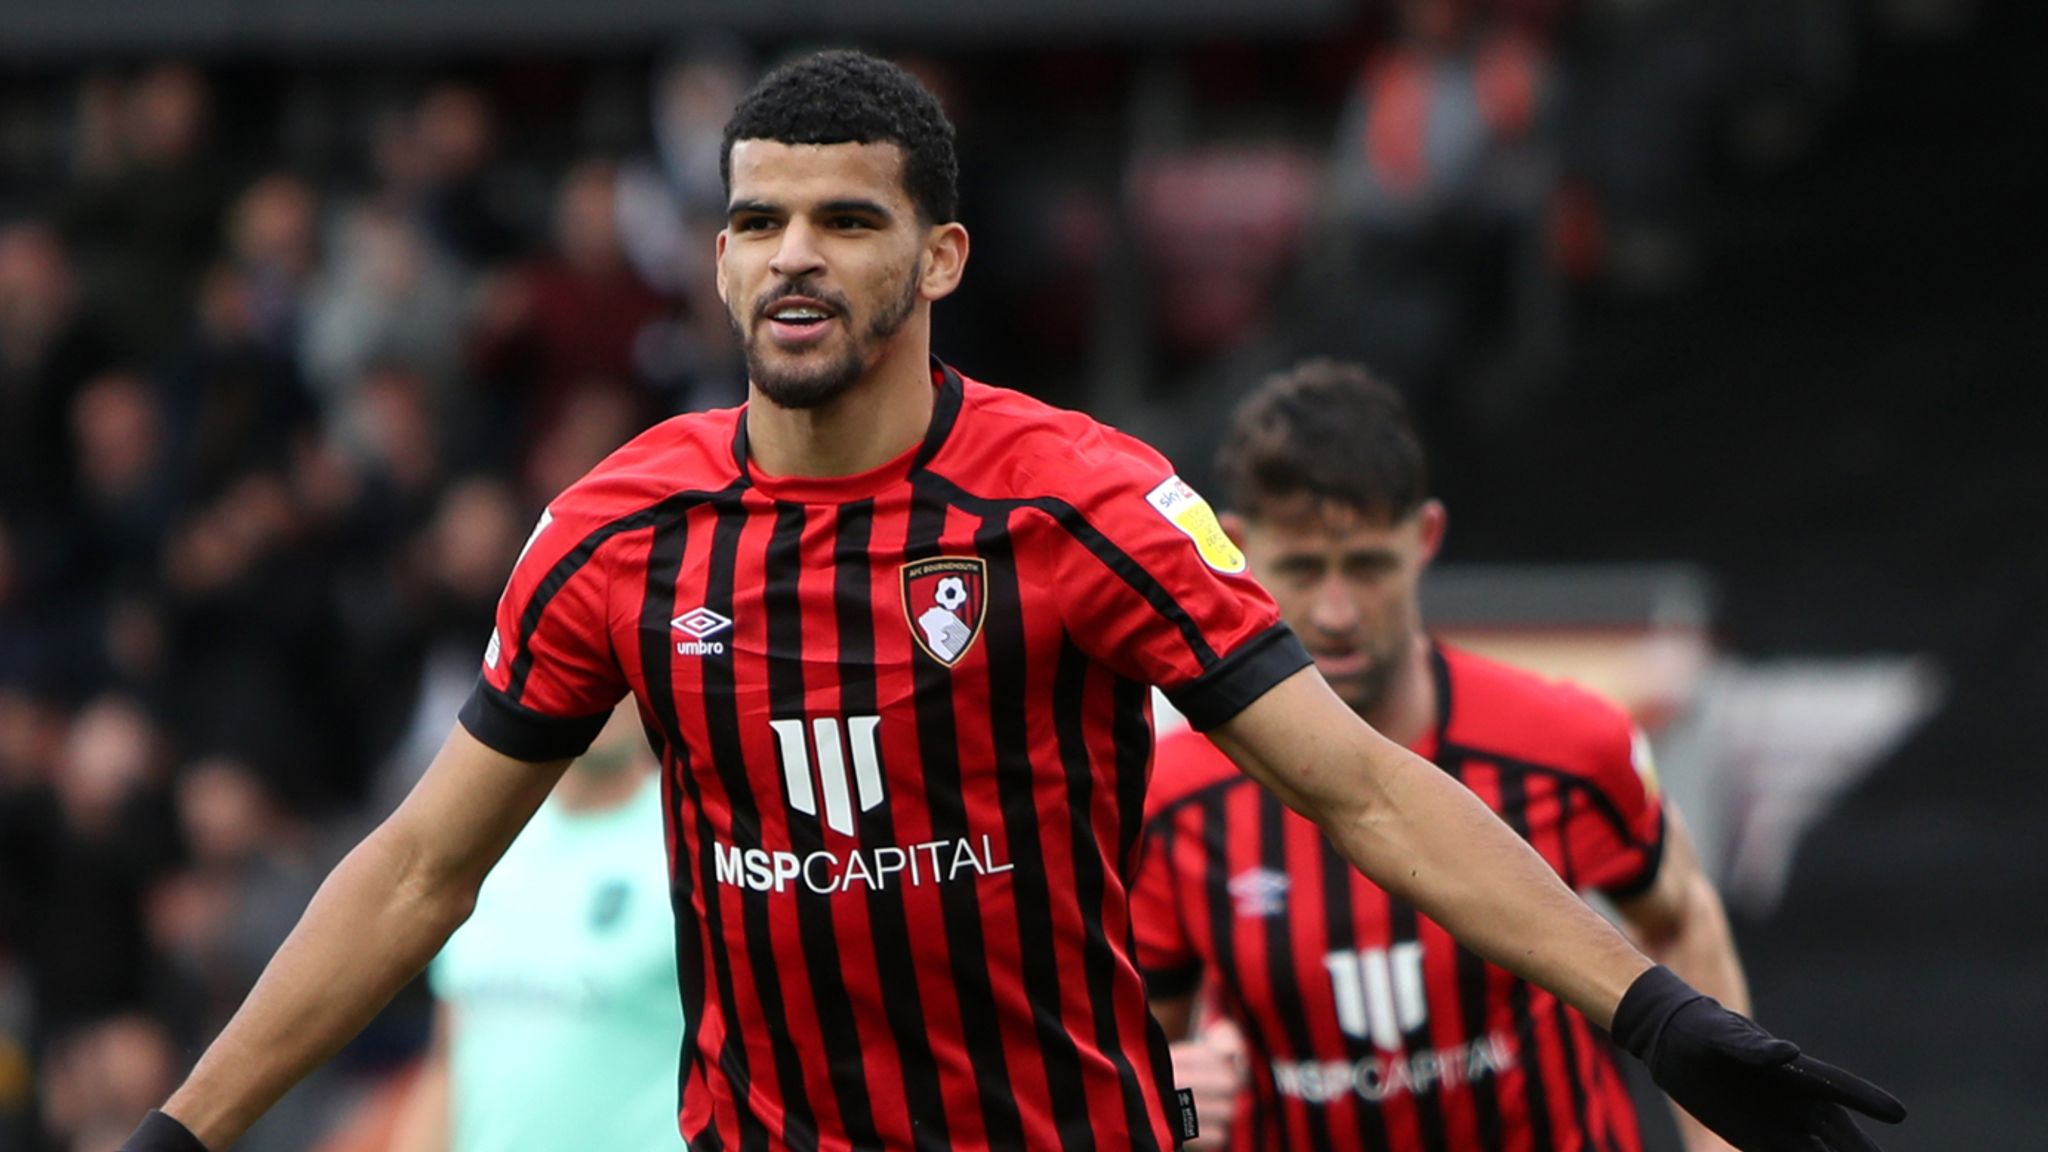 Former Chelsea man Dominic Solanke has been absolutely top-class for AFC Bournemouth.